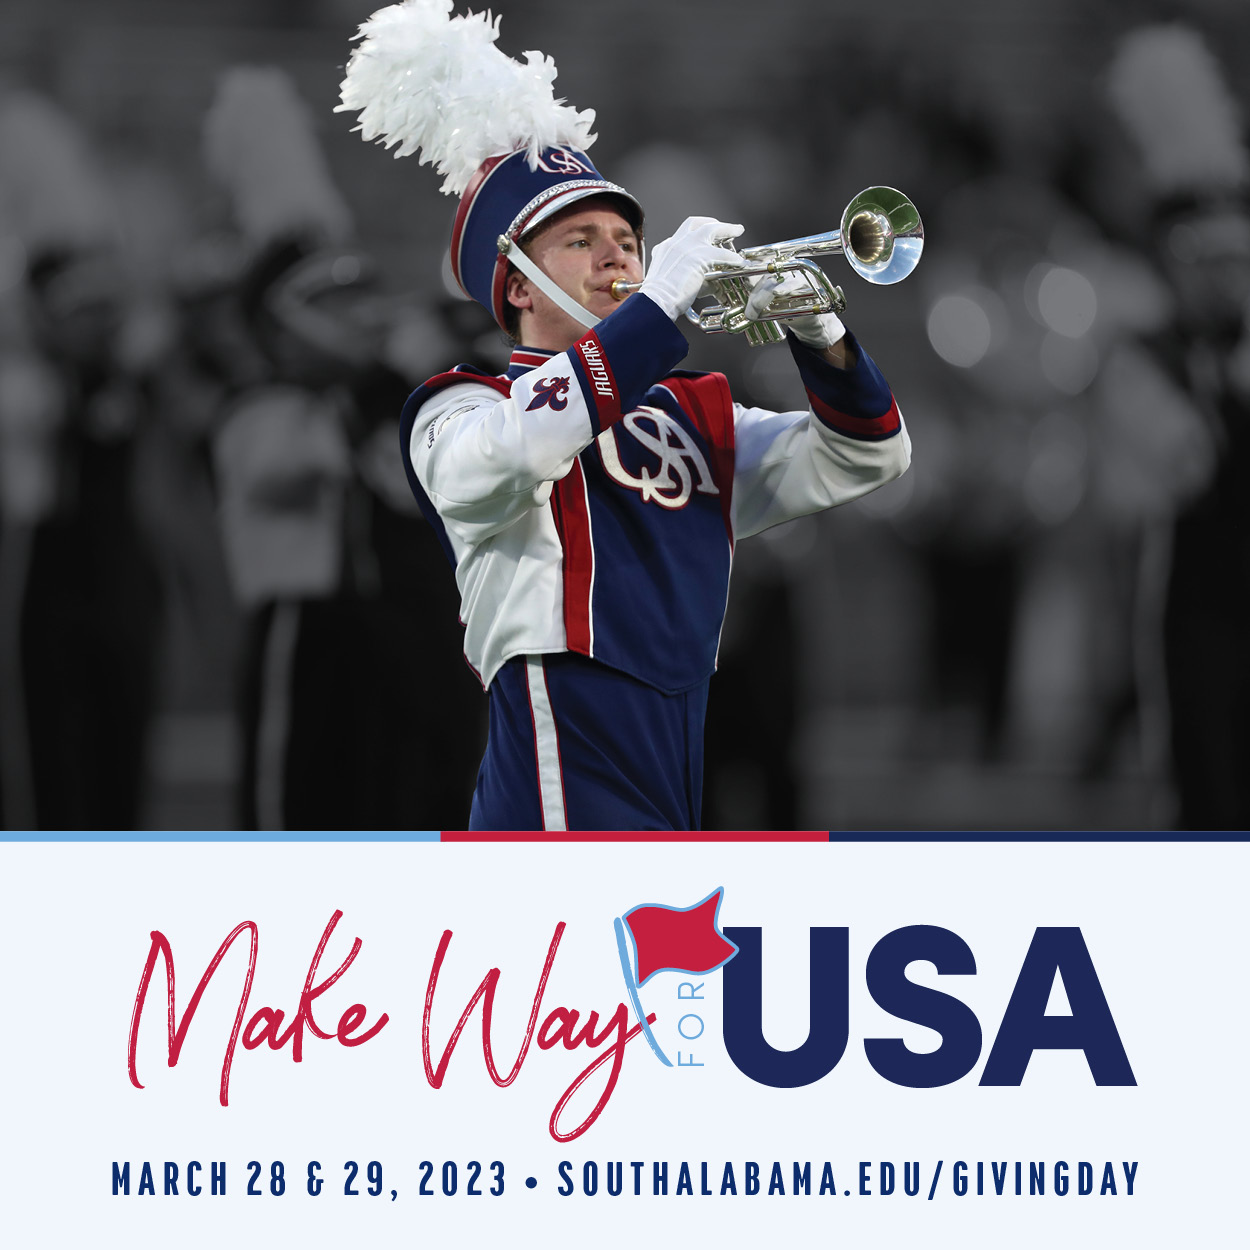 Make Way for USA March 28 and 29, 2023 Southalabama.edu/givingday with image of USA marching band member on football field playing instrument.